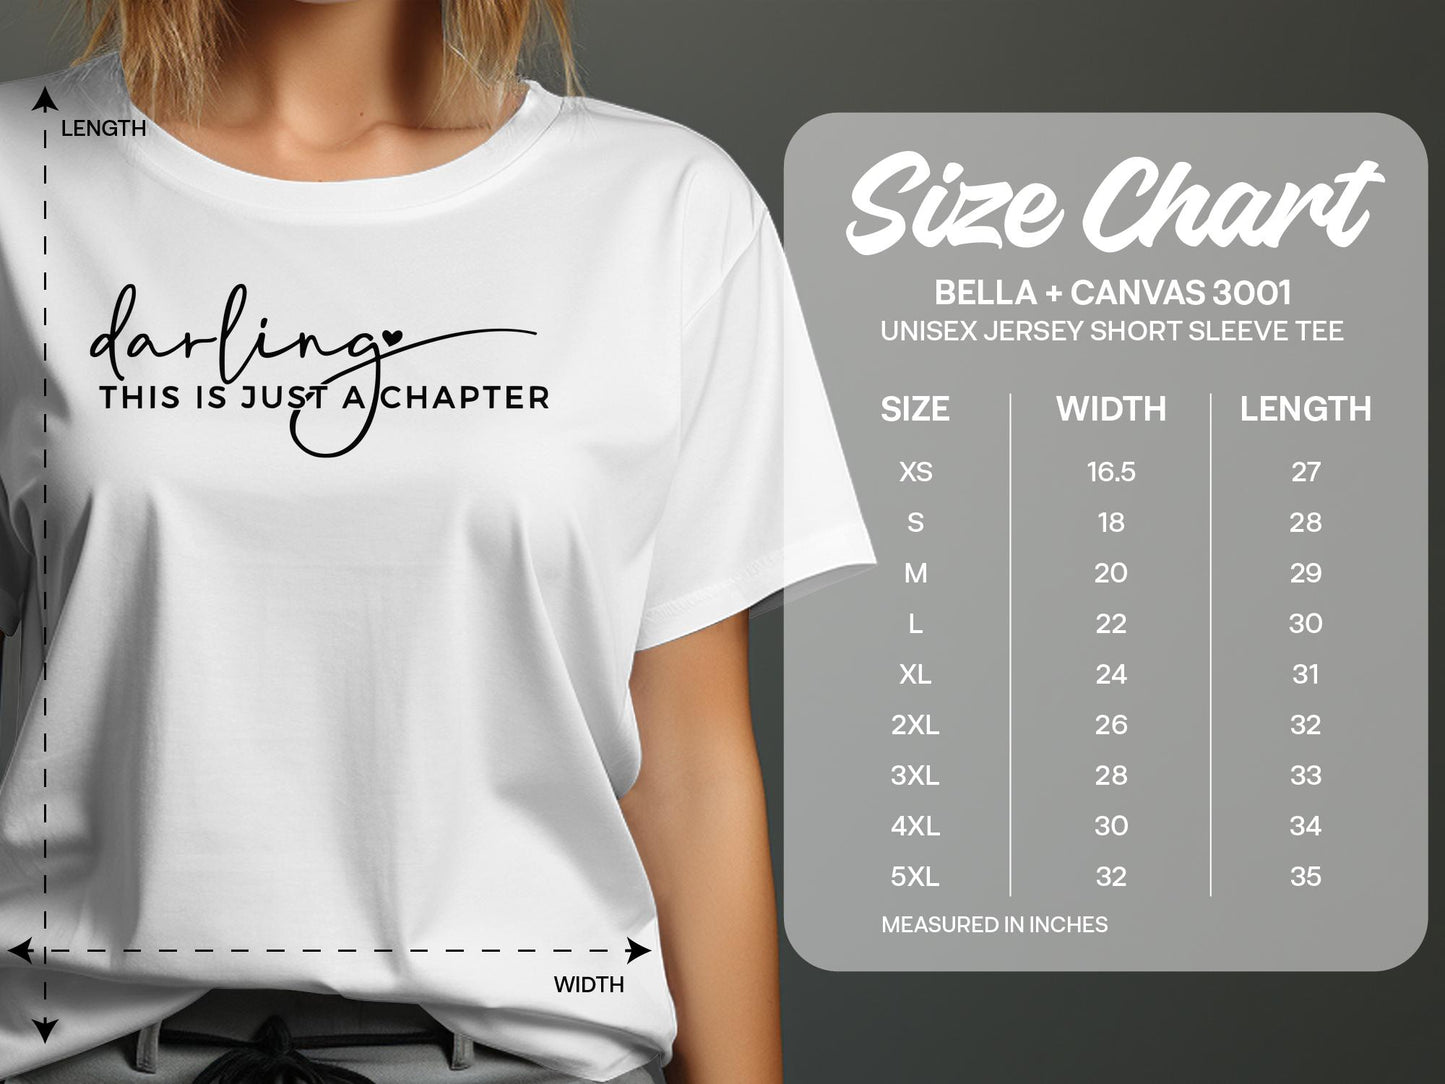 Darling This Is Just A Chapter T-Shirt - Mardonyx T-Shirt